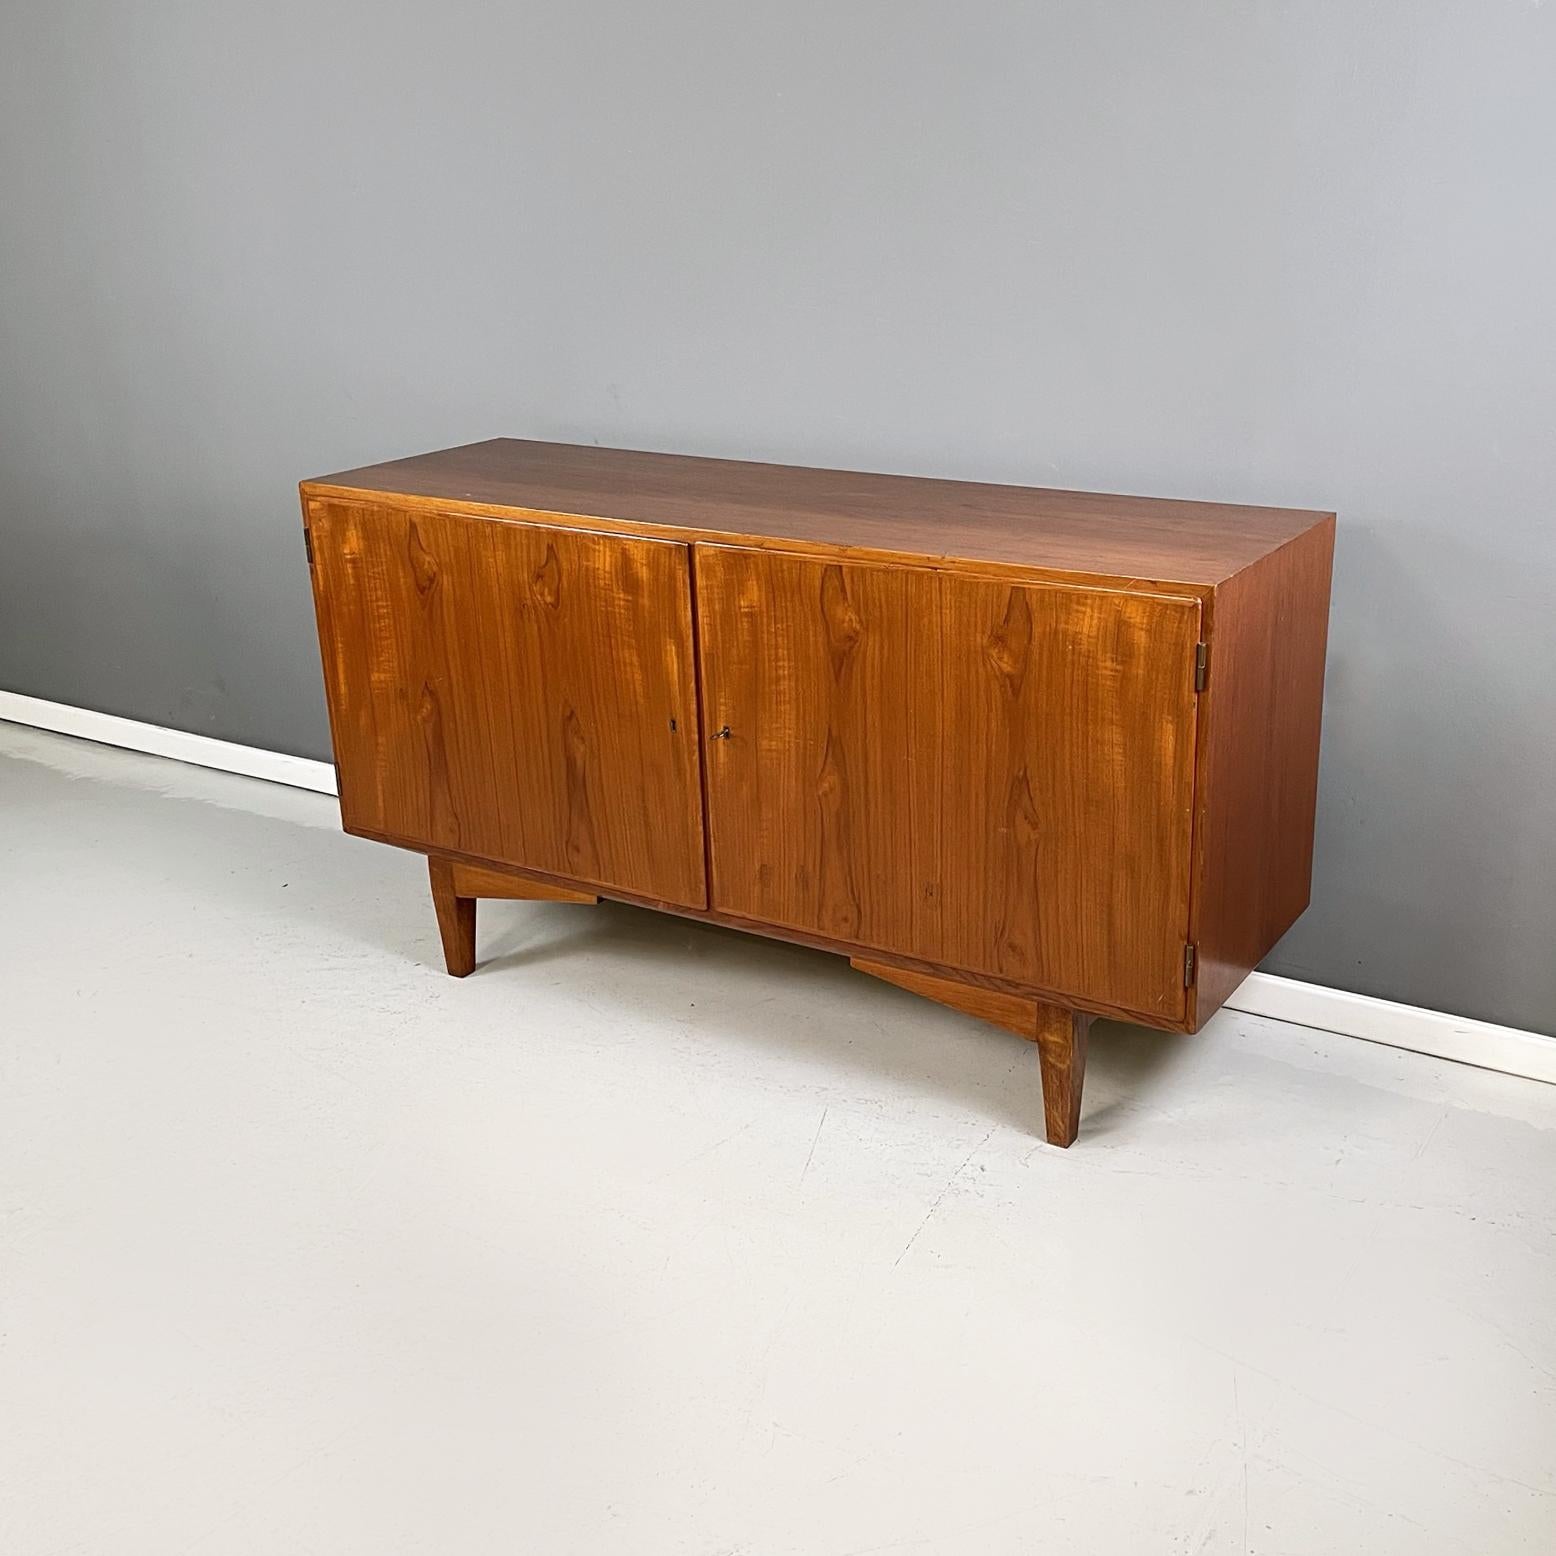 Mid-Century Modern Italian Midcentury Wooden Sideboard with Drawer and Shelves, 1960s For Sale